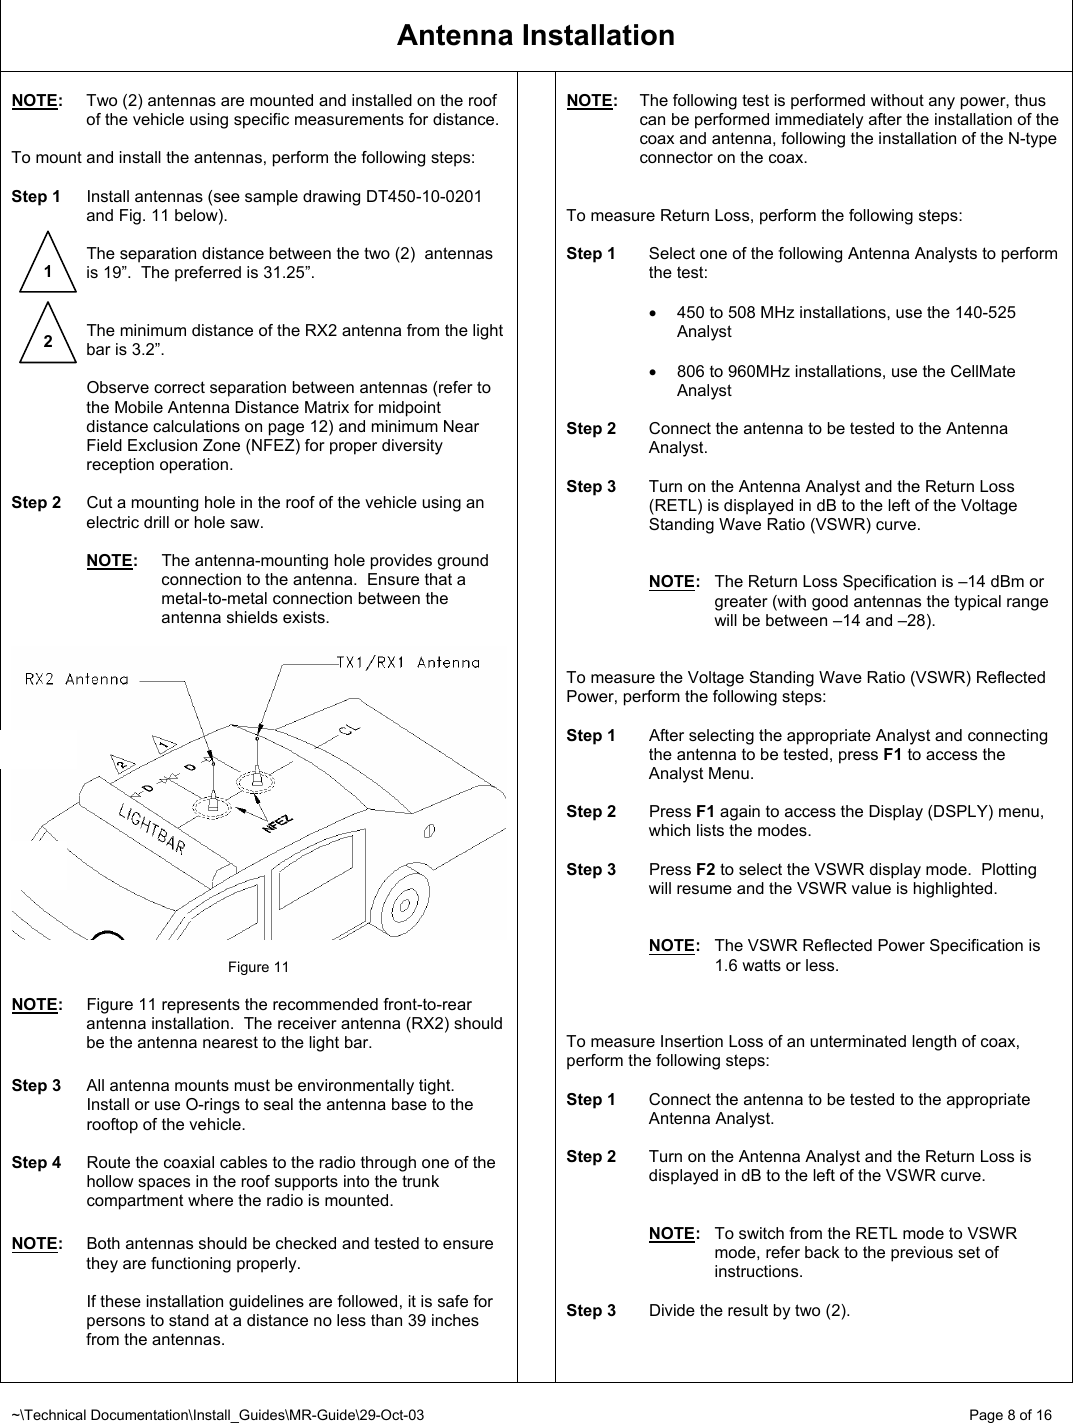 ~\Technical Documentation\Install_Guides\MR-Guide\29-Oct-03   Page 8 of 16 Antenna Installation  NOTE:  Two (2) antennas are mounted and installed on the roof of the vehicle using specific measurements for distance.  To mount and install the antennas, perform the following steps:  Step 1  Install antennas (see sample drawing DT450-10-0201 and Fig. 11 below).    The separation distance between the two (2)  antennas is 19”.  The preferred is 31.25”.      The minimum distance of the RX2 antenna from the light bar is 3.2”.    Observe correct separation between antennas (refer to the Mobile Antenna Distance Matrix for midpoint distance calculations on page 12) and minimum Near Field Exclusion Zone (NFEZ) for proper diversity reception operation.  Step 2  Cut a mounting hole in the roof of the vehicle using an electric drill or hole saw.   NOTE:  The antenna-mounting hole provides ground connection to the antenna.  Ensure that a metal-to-metal connection between the antenna shields exists.     Figure 11  NOTE:  Figure 11 represents the recommended front-to-rear antenna installation.  The receiver antenna (RX2) should be the antenna nearest to the light bar.  Step 3  All antenna mounts must be environmentally tight.  Install or use O-rings to seal the antenna base to the rooftop of the vehicle.  Step 4  Route the coaxial cables to the radio through one of the hollow spaces in the roof supports into the trunk compartment where the radio is mounted.  NOTE:  Both antennas should be checked and tested to ensure they are functioning properly.    If these installation guidelines are followed, it is safe for persons to stand at a distance no less than 39 inches from the antennas.   NOTE:  The following test is performed without any power, thus can be performed immediately after the installation of the coax and antenna, following the installation of the N-type connector on the coax.    To measure Return Loss, perform the following steps:  Step 1  Select one of the following Antenna Analysts to perform the test:  •  450 to 508 MHz installations, use the 140-525 Analyst  •  806 to 960MHz installations, use the CellMate Analyst  Step 2  Connect the antenna to be tested to the Antenna Analyst.  Step 3  Turn on the Antenna Analyst and the Return Loss (RETL) is displayed in dB to the left of the Voltage Standing Wave Ratio (VSWR) curve.   NOTE:  The Return Loss Specification is –14 dBm or greater (with good antennas the typical range will be between –14 and –28).   To measure the Voltage Standing Wave Ratio (VSWR) Reflected Power, perform the following steps:  Step 1  After selecting the appropriate Analyst and connecting the antenna to be tested, press F1 to access the Analyst Menu.    Step 2 Press F1 again to access the Display (DSPLY) menu, which lists the modes.  Step 3 Press F2 to select the VSWR display mode.  Plotting will resume and the VSWR value is highlighted.   NOTE:  The VSWR Reflected Power Specification is 1.6 watts or less.    To measure Insertion Loss of an unterminated length of coax, perform the following steps:  Step 1  Connect the antenna to be tested to the appropriate Antenna Analyst.  Step 2  Turn on the Antenna Analyst and the Return Loss is displayed in dB to the left of the VSWR curve.   NOTE:  To switch from the RETL mode to VSWR mode, refer back to the previous set of instructions.  Step 3  Divide the result by two (2).  1 2 